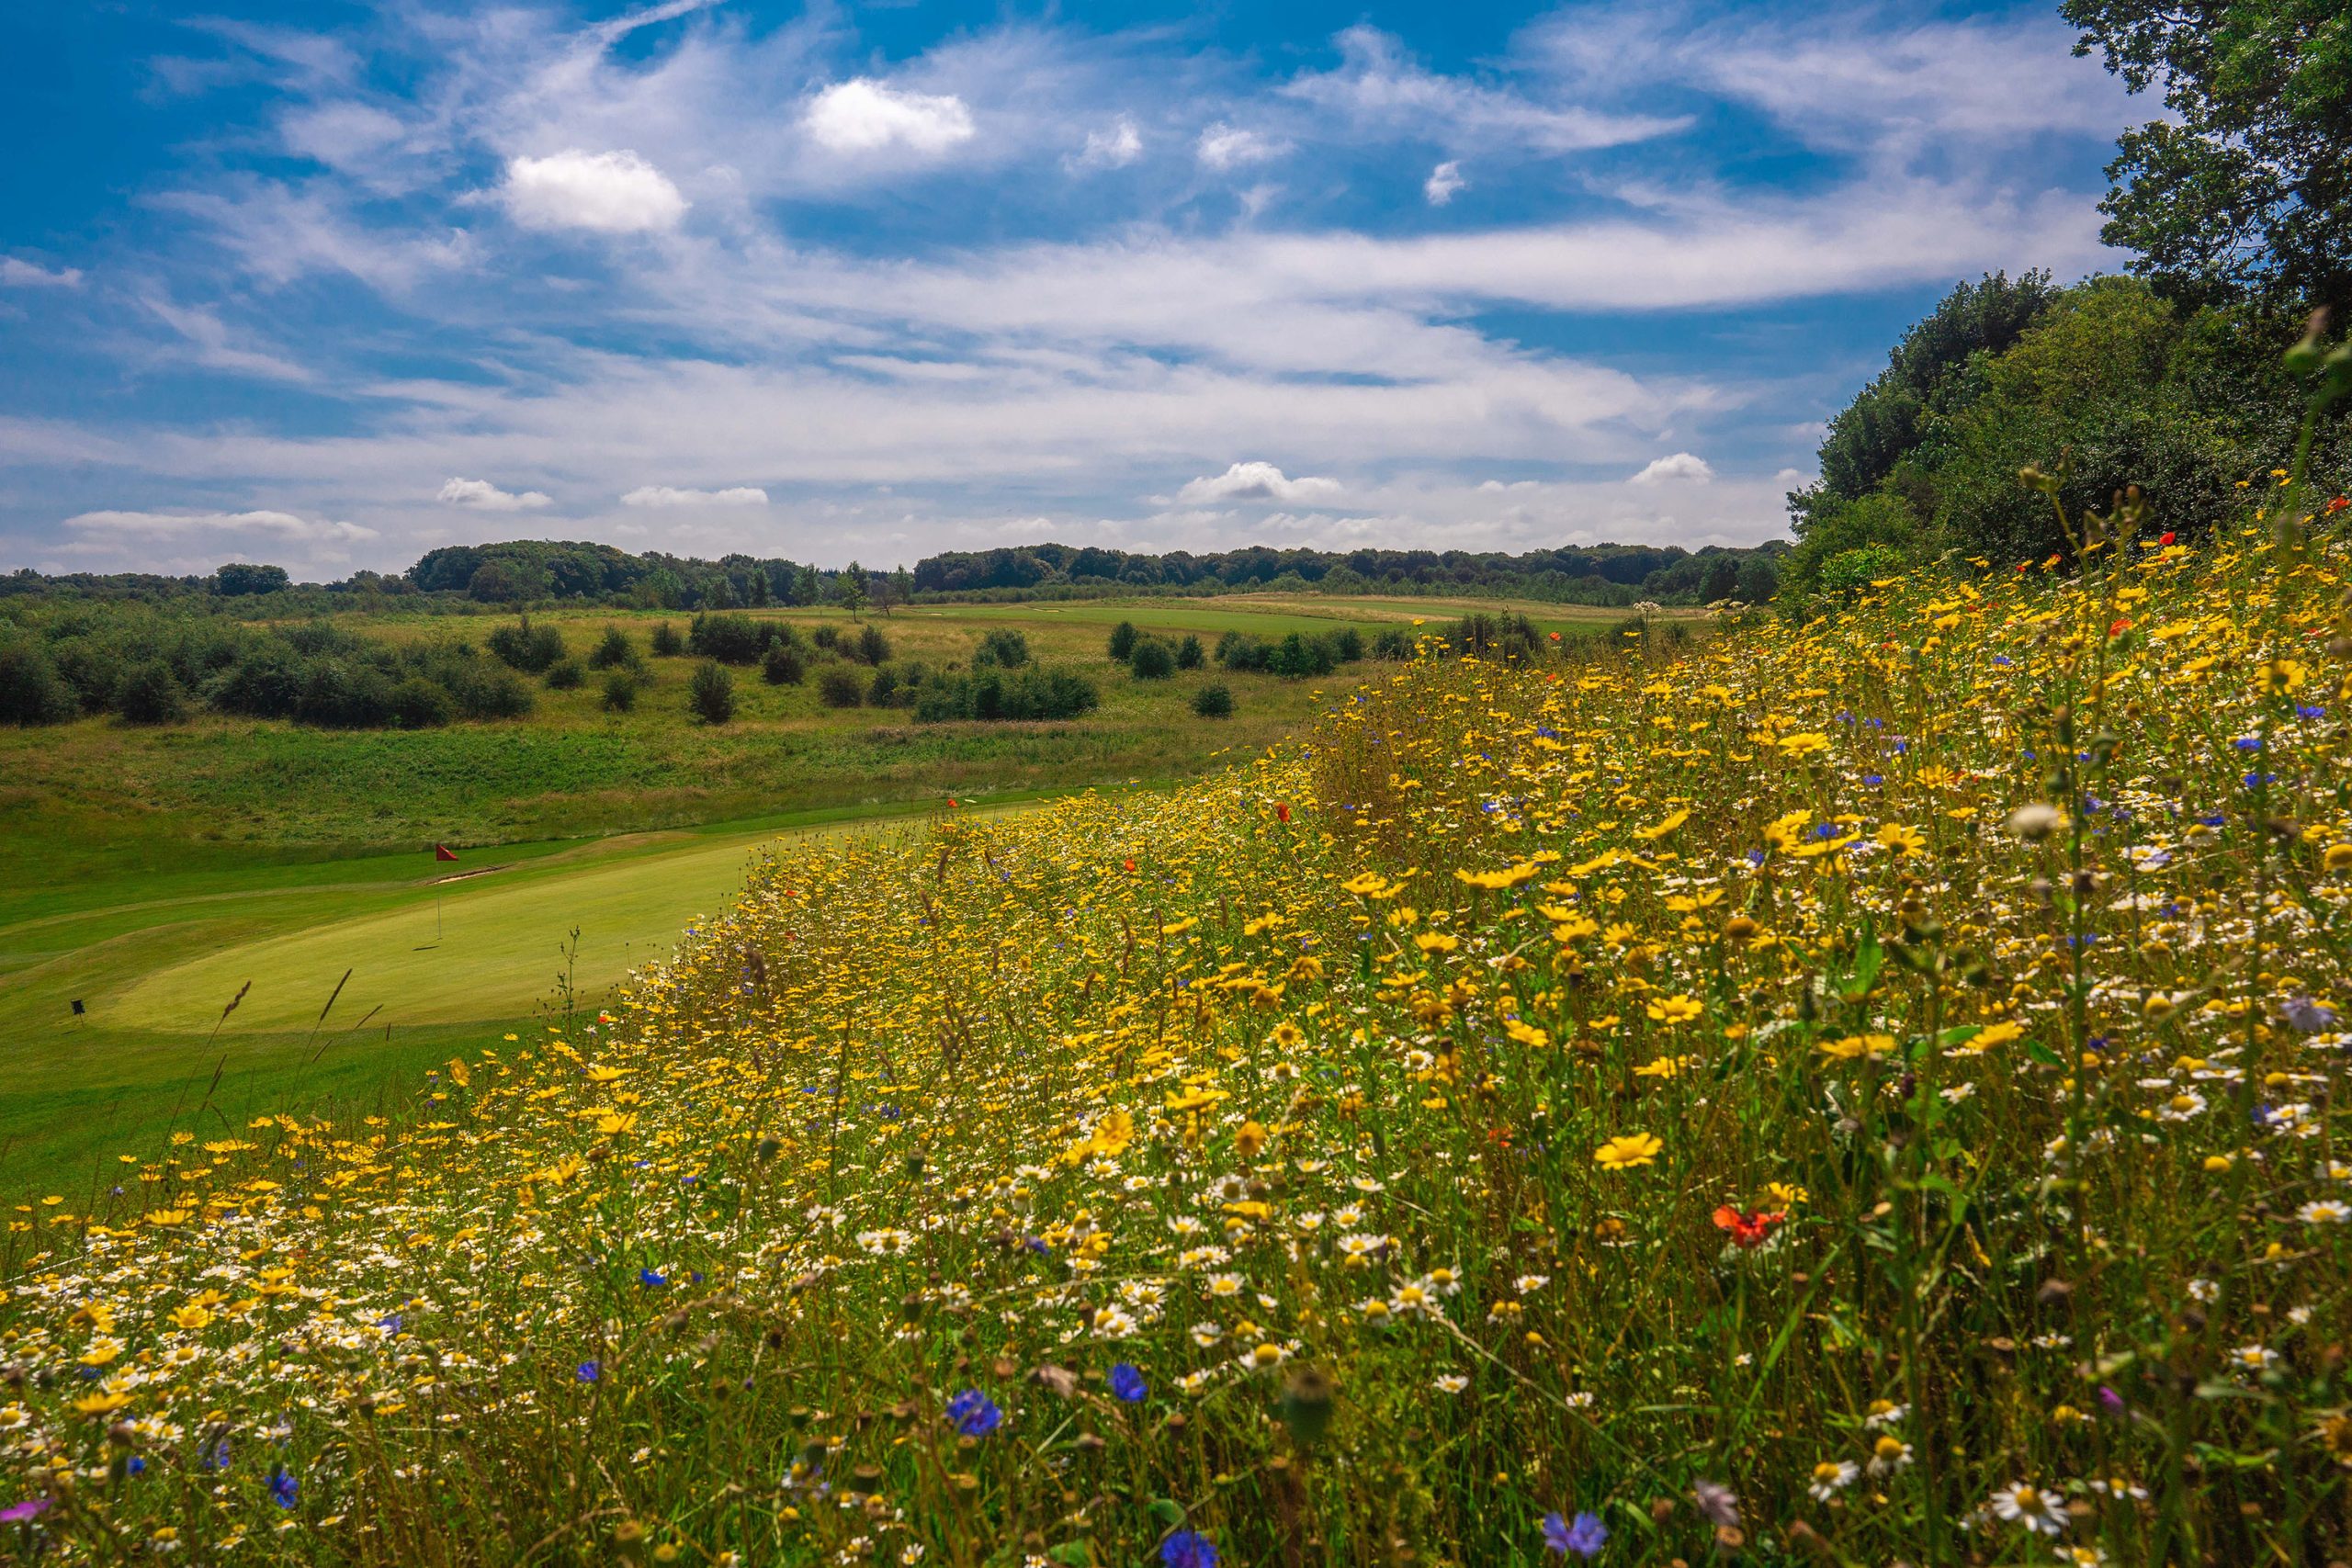 Wildflowers enrich the Farleigh Golf Club environment for players mr